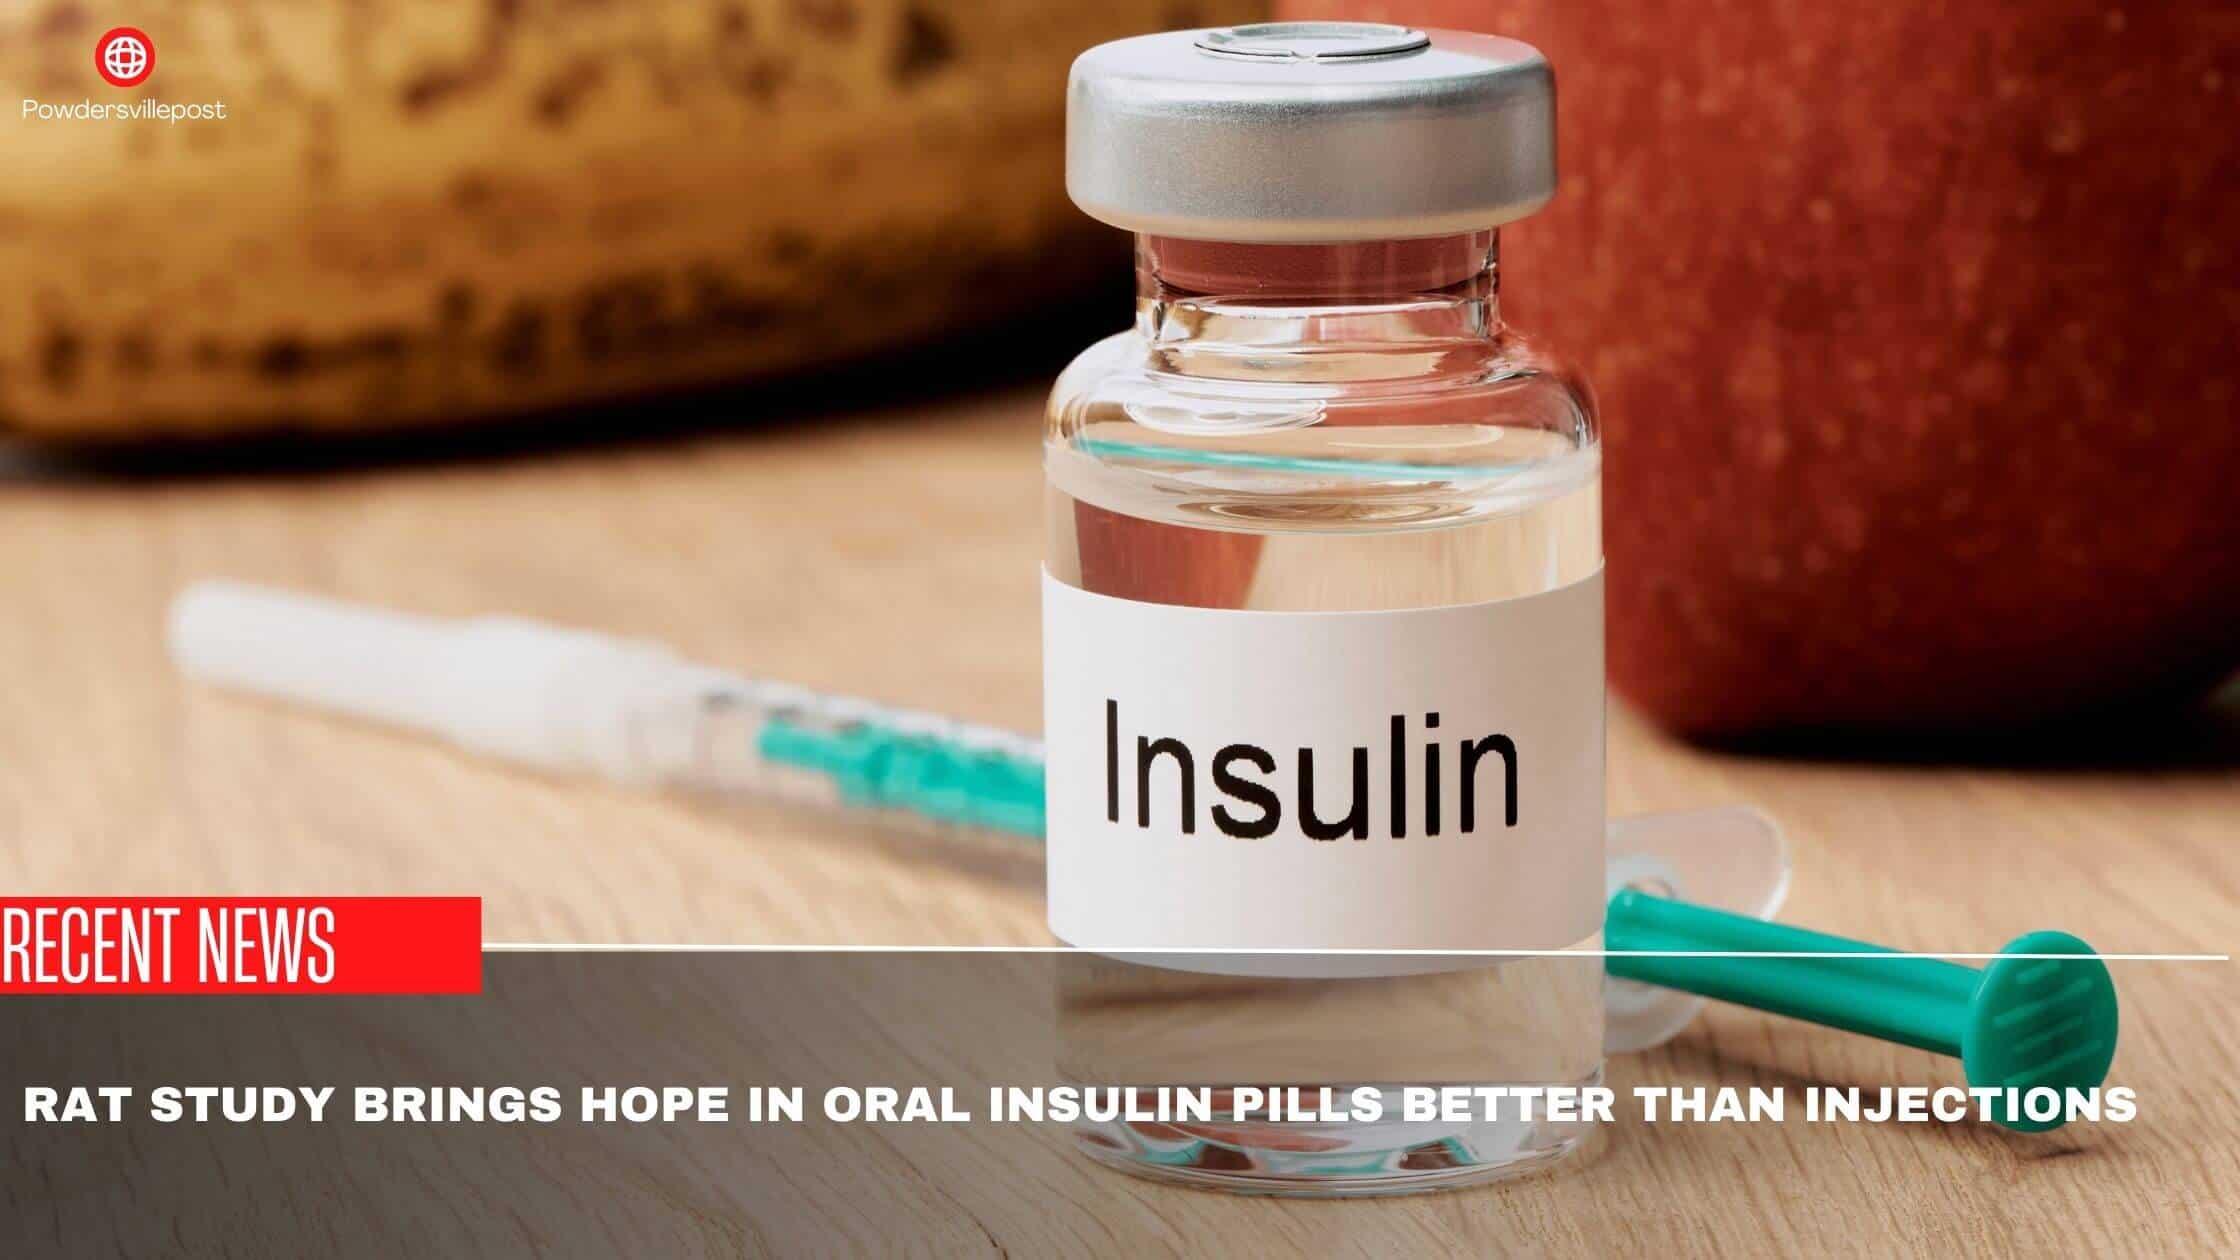 Rat Study Brings Hope In Oral Insulin Pills Better Than Injections